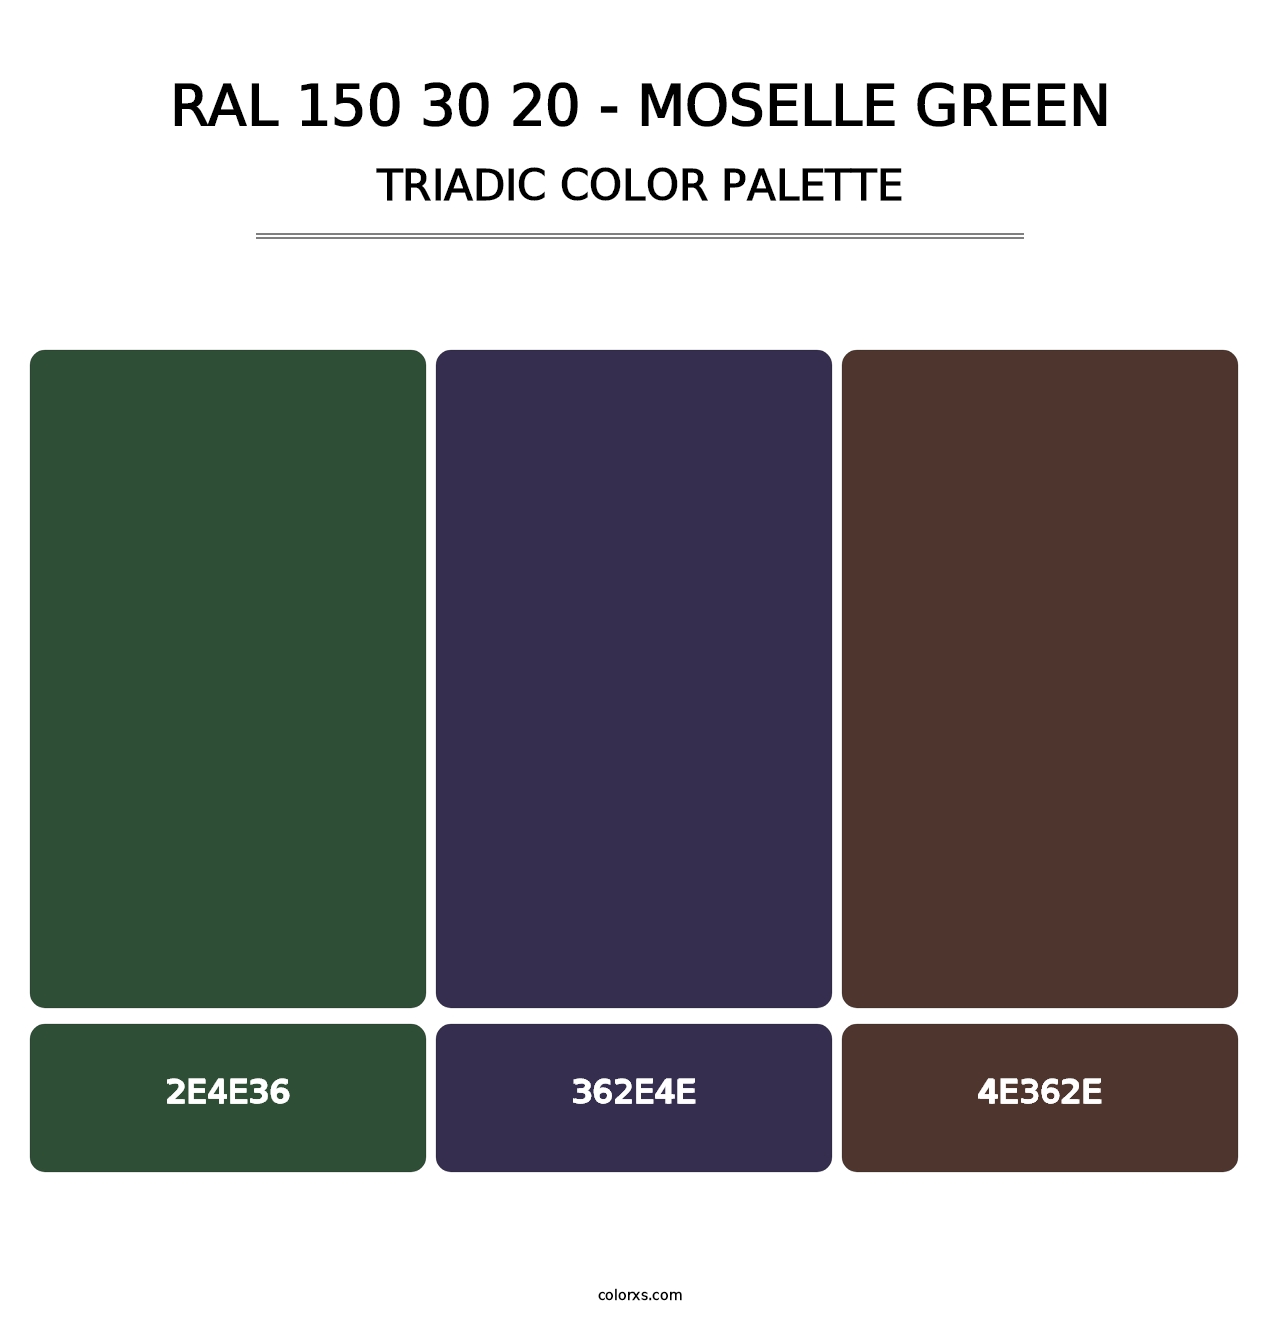 RAL 150 30 20 - Moselle Green - Triadic Color Palette